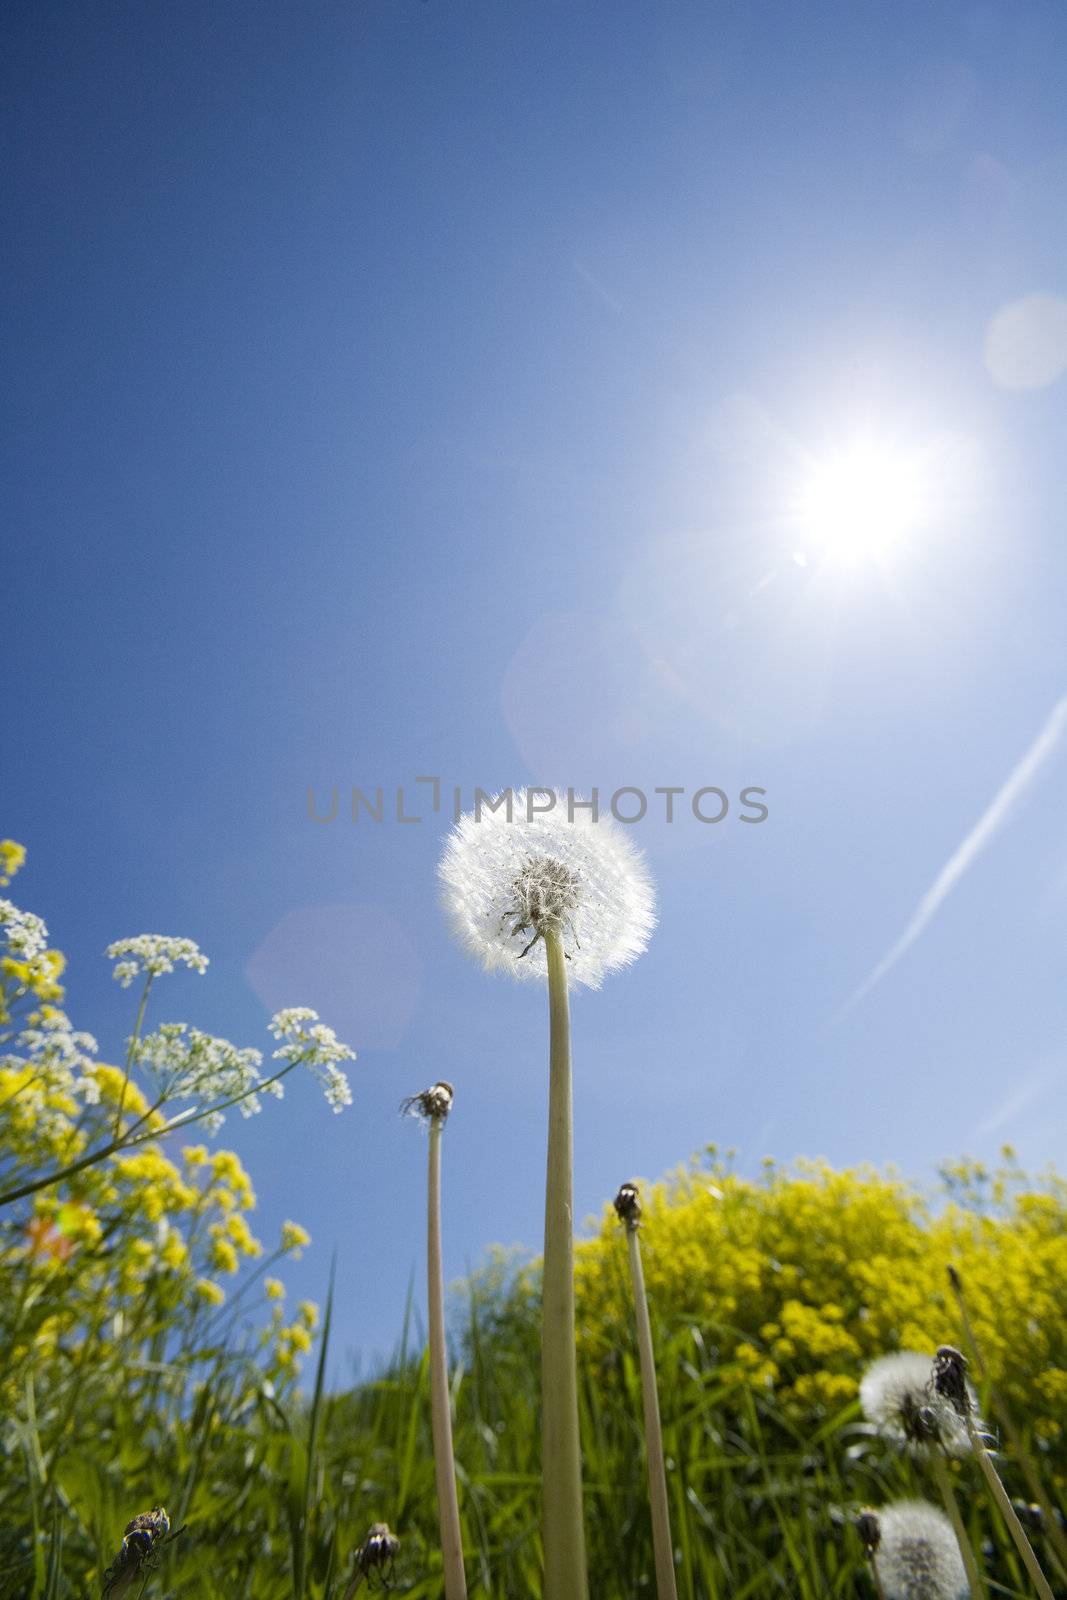 Dandelion from low angle view towards blue sky